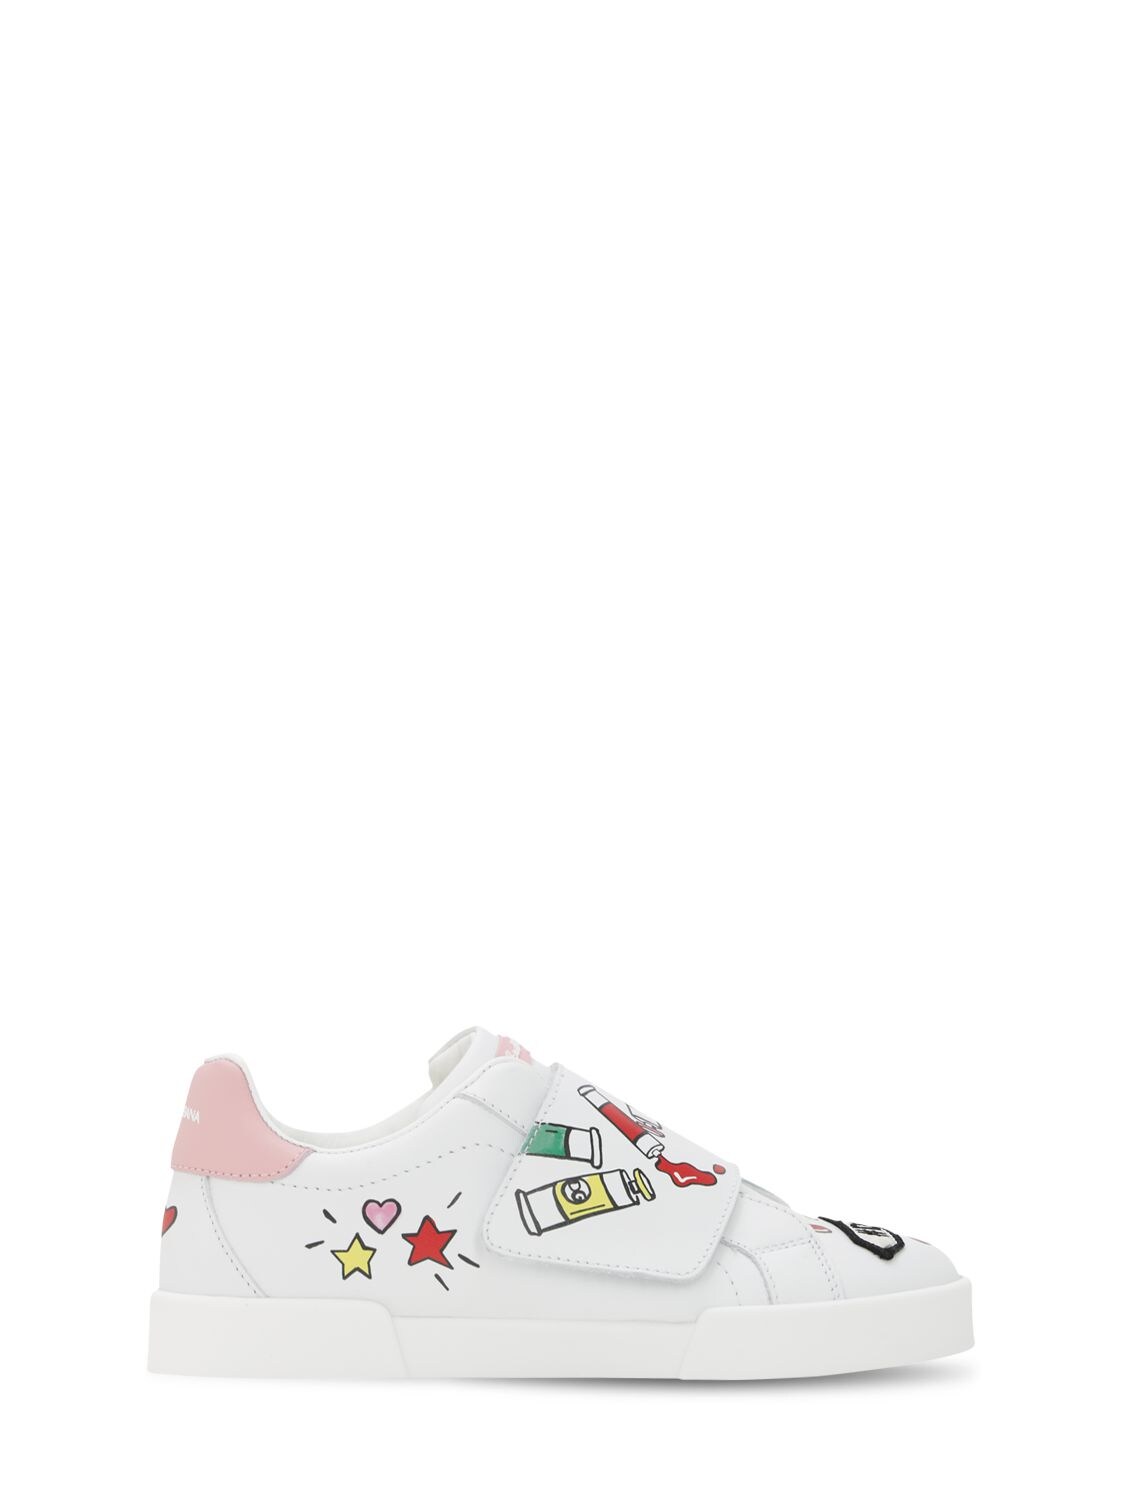 DOLCE & GABBANA PENCIL PRINTED LEATHER SNEAKERS W/ PATCH,70I8YQ002-SFDGNTC1